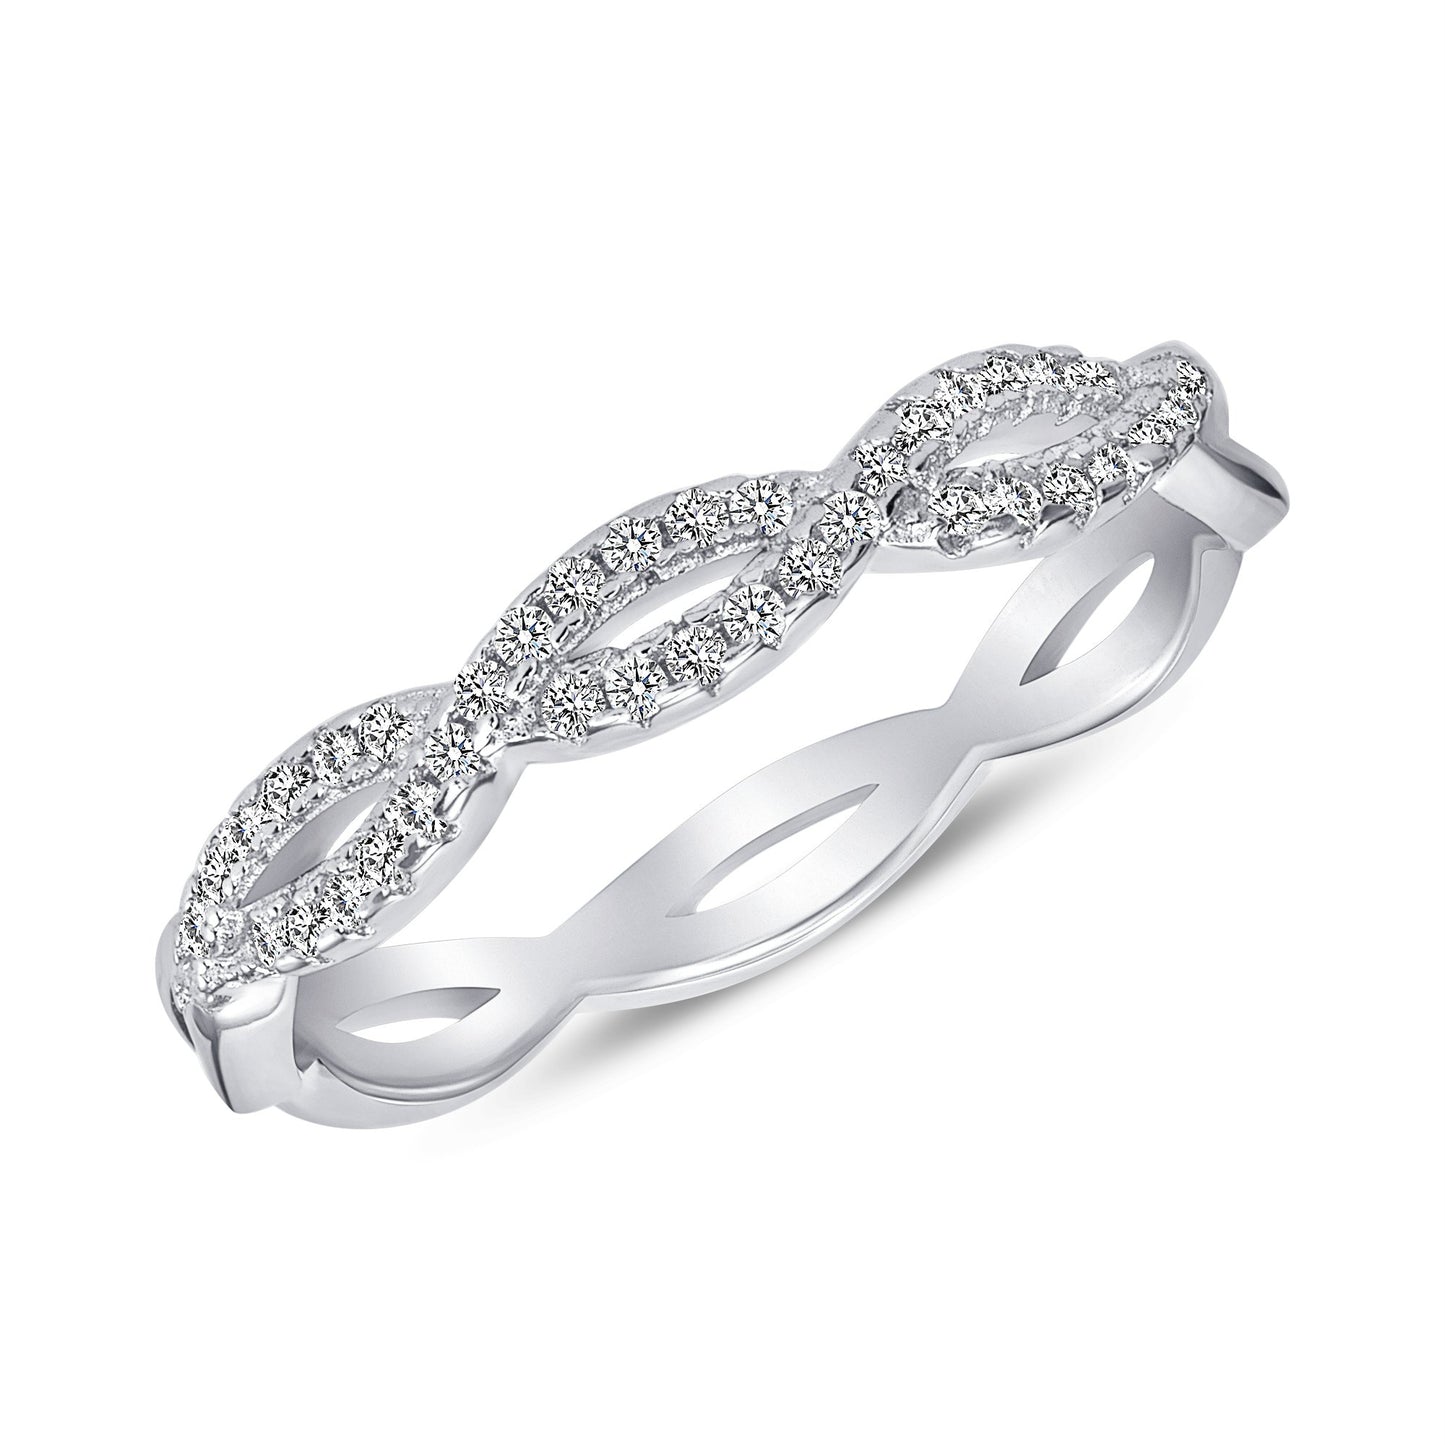 GR9636. Silver 925 Rhodium Plated Infinity Band Ring